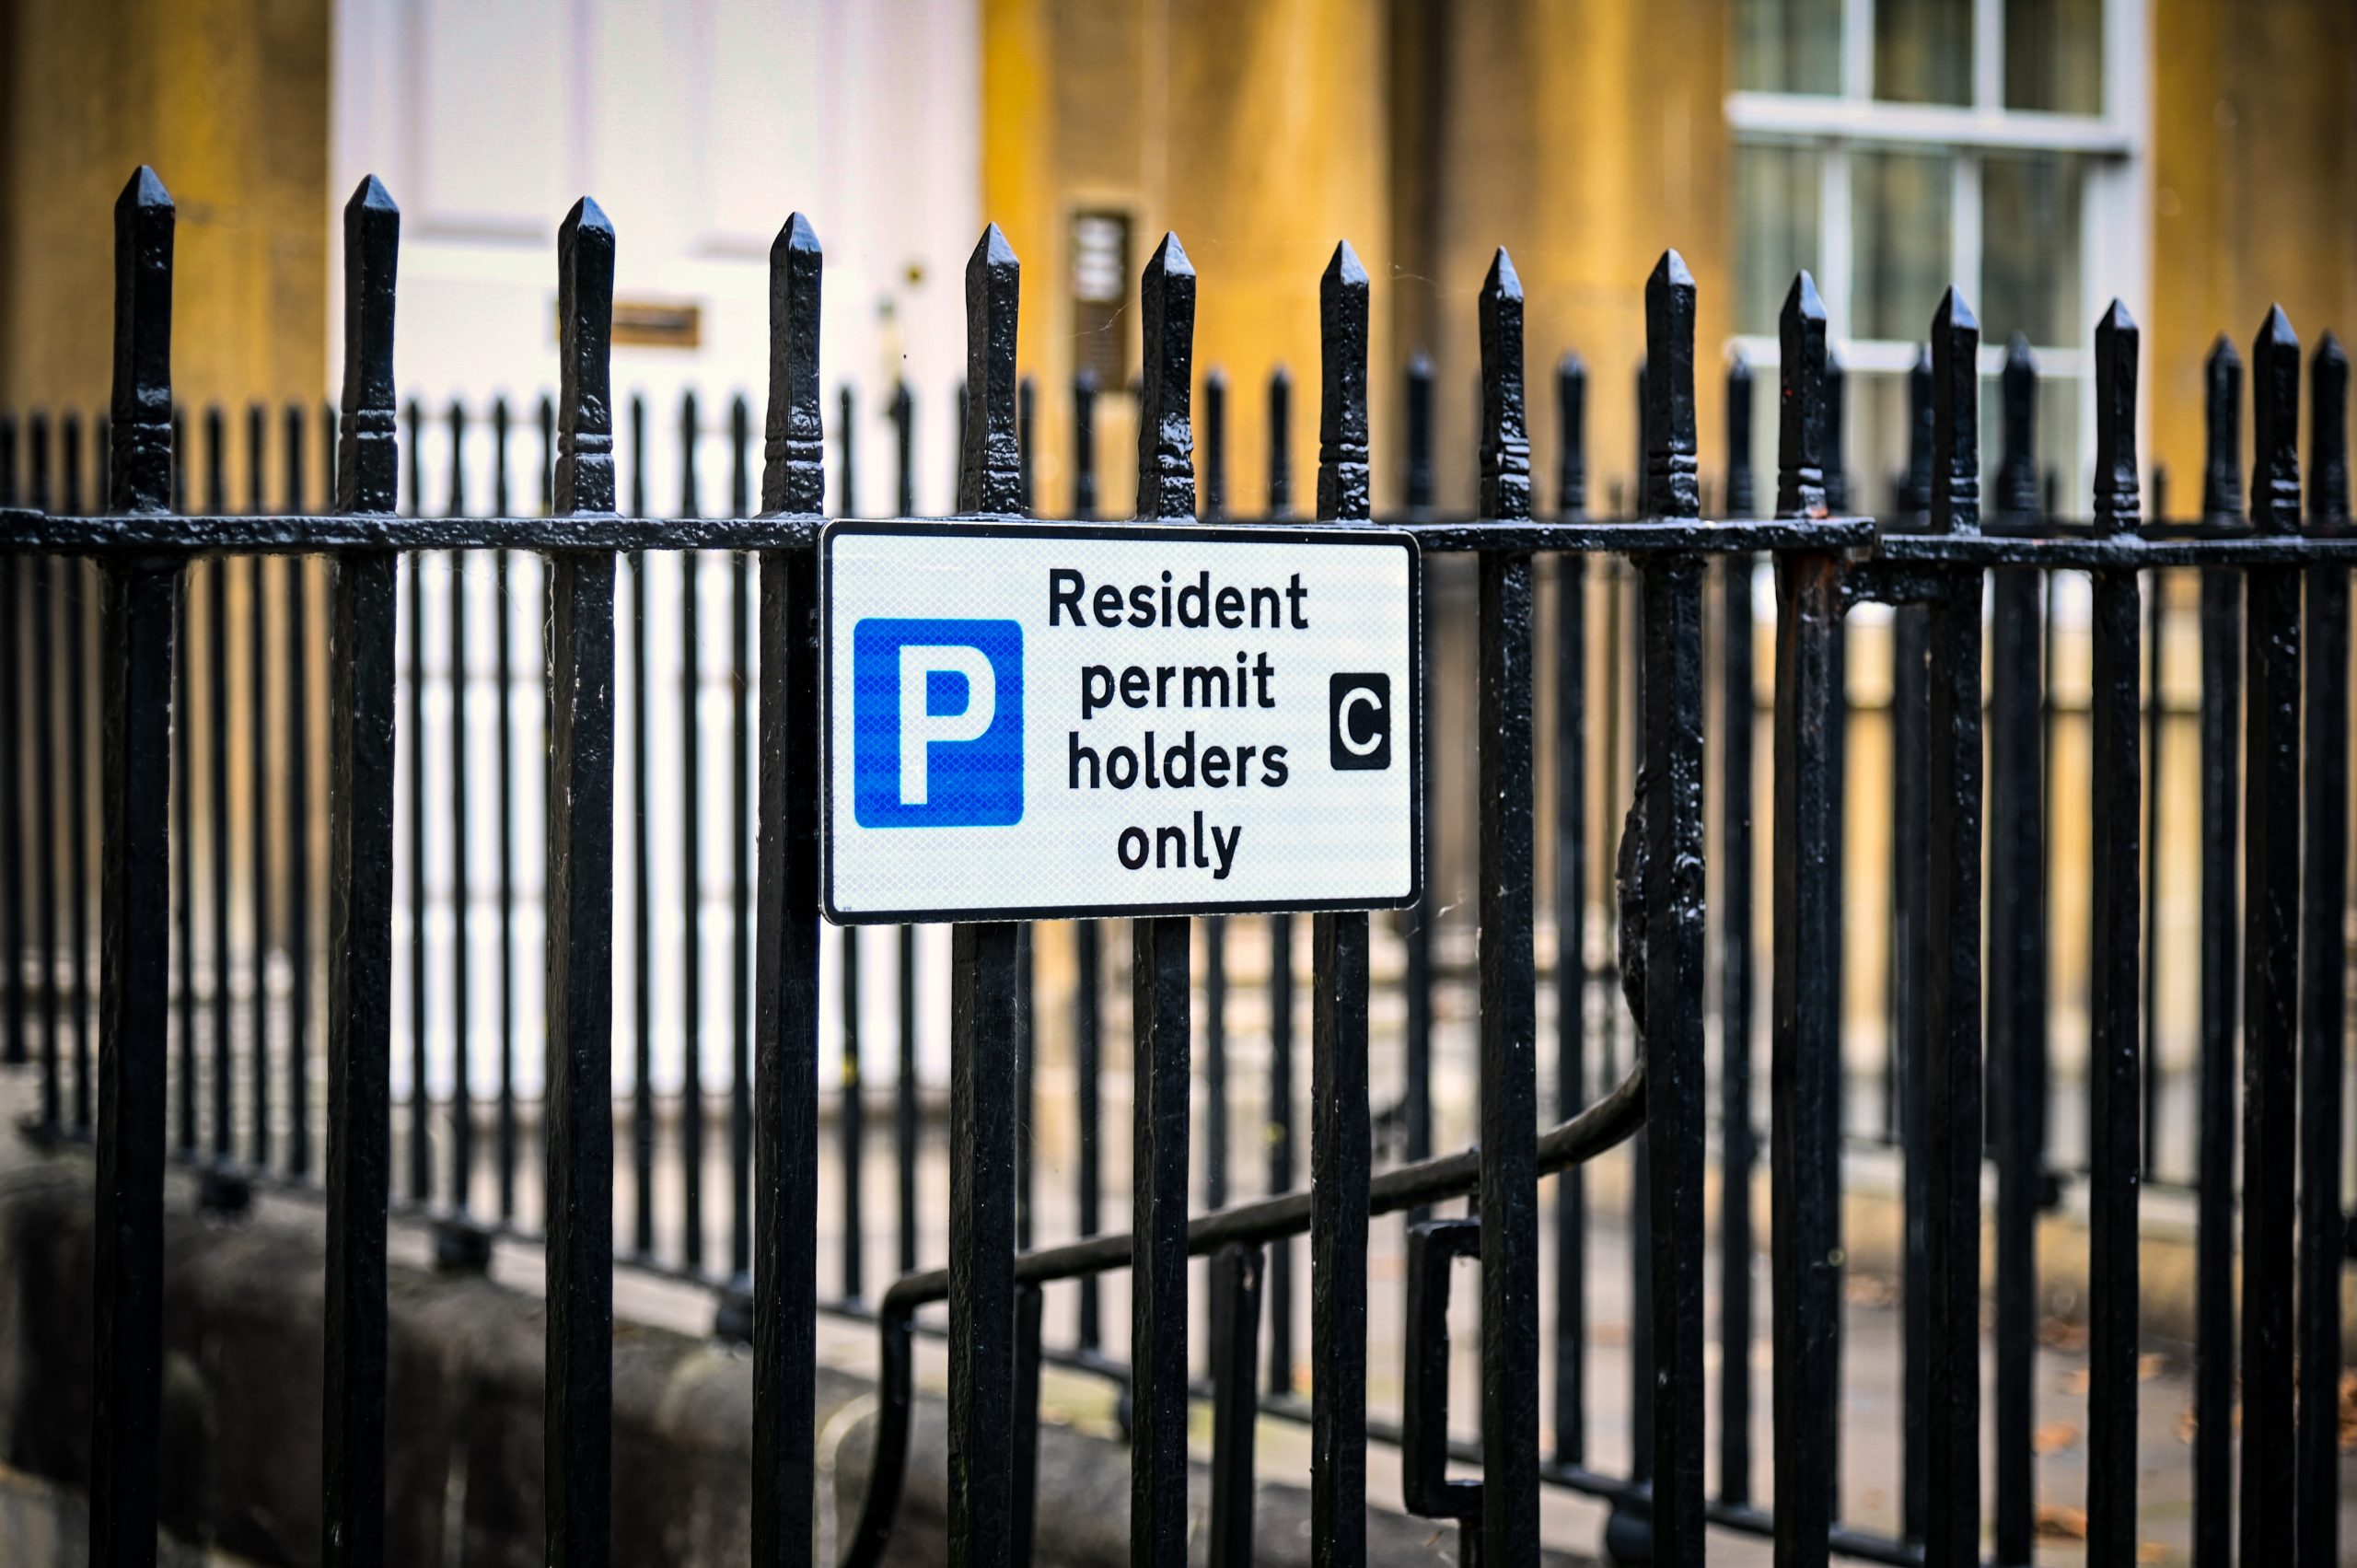 Resident permit sign on railings